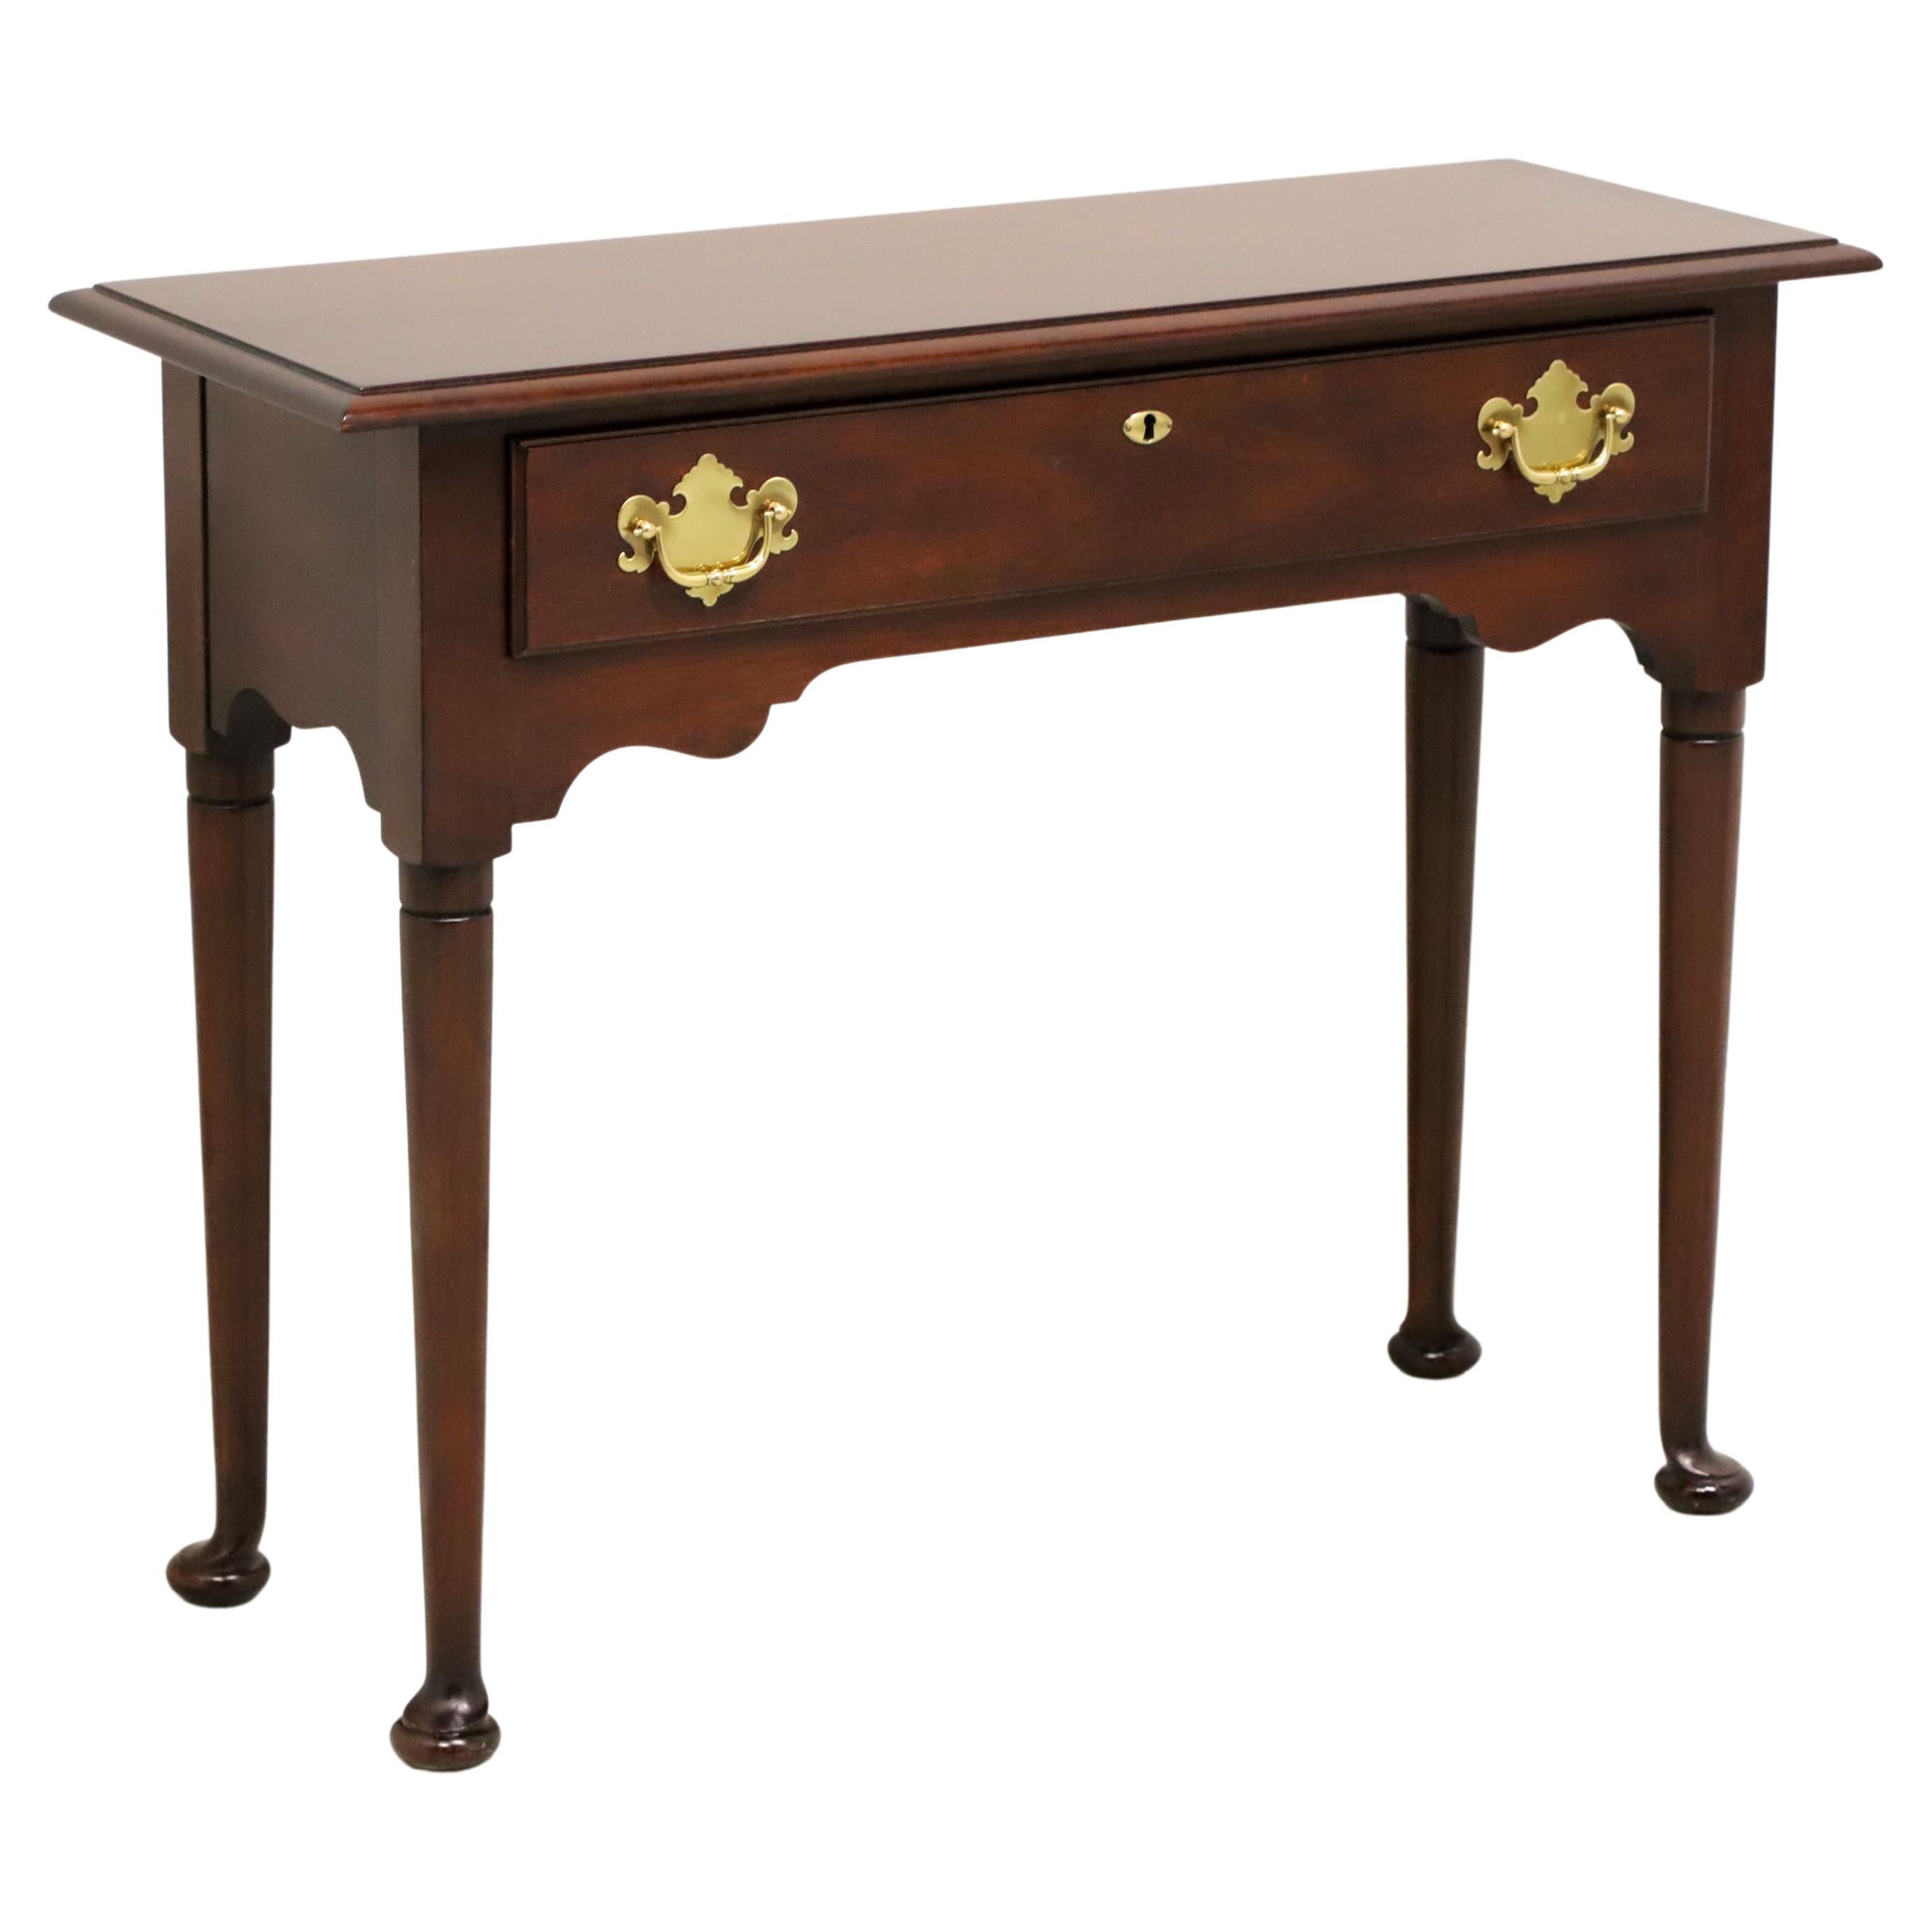 STATTON Trutype Solid Cherry Georgian Console Table